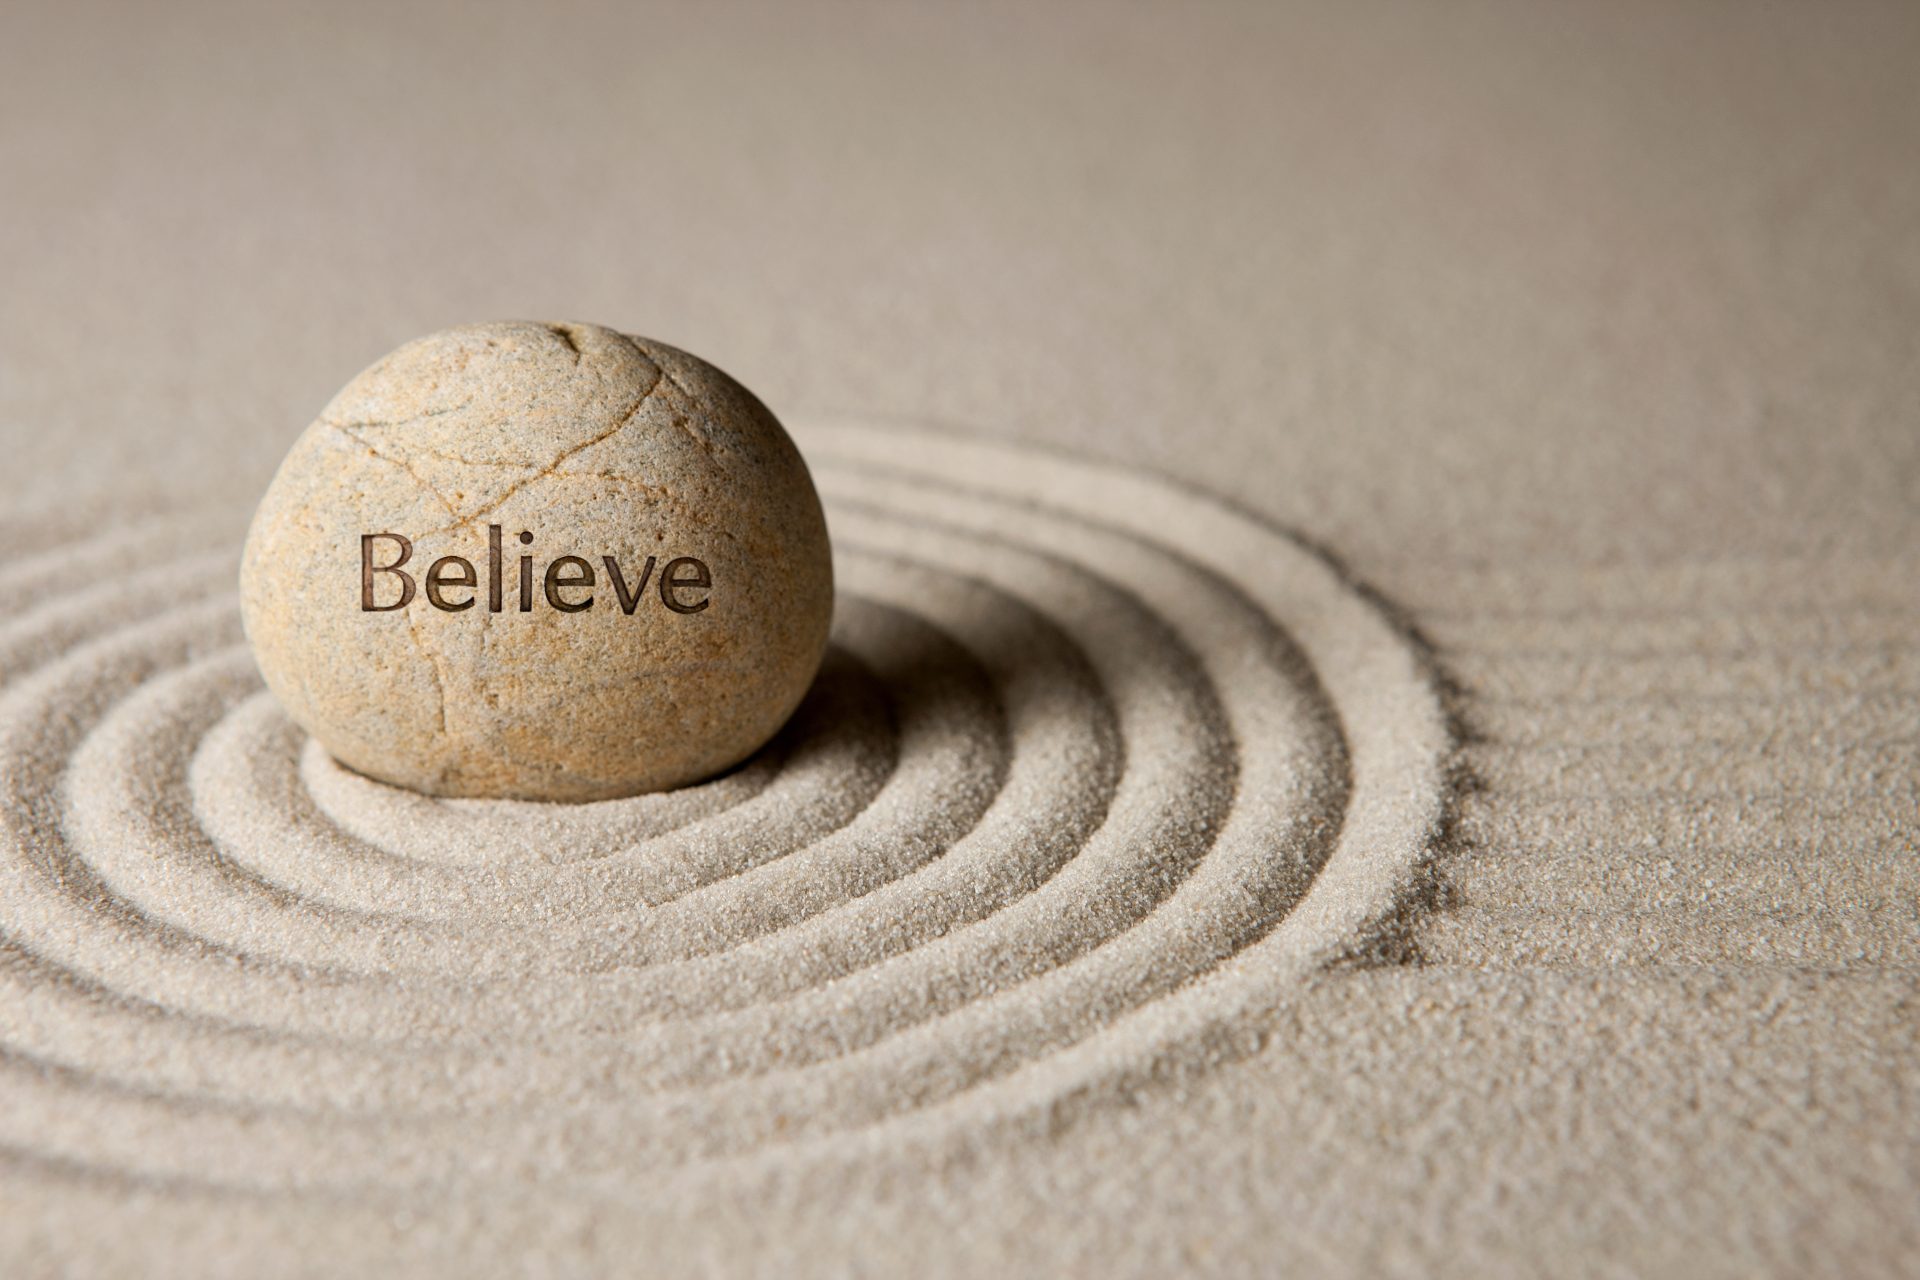 Believe: To Be Present… Here… Now